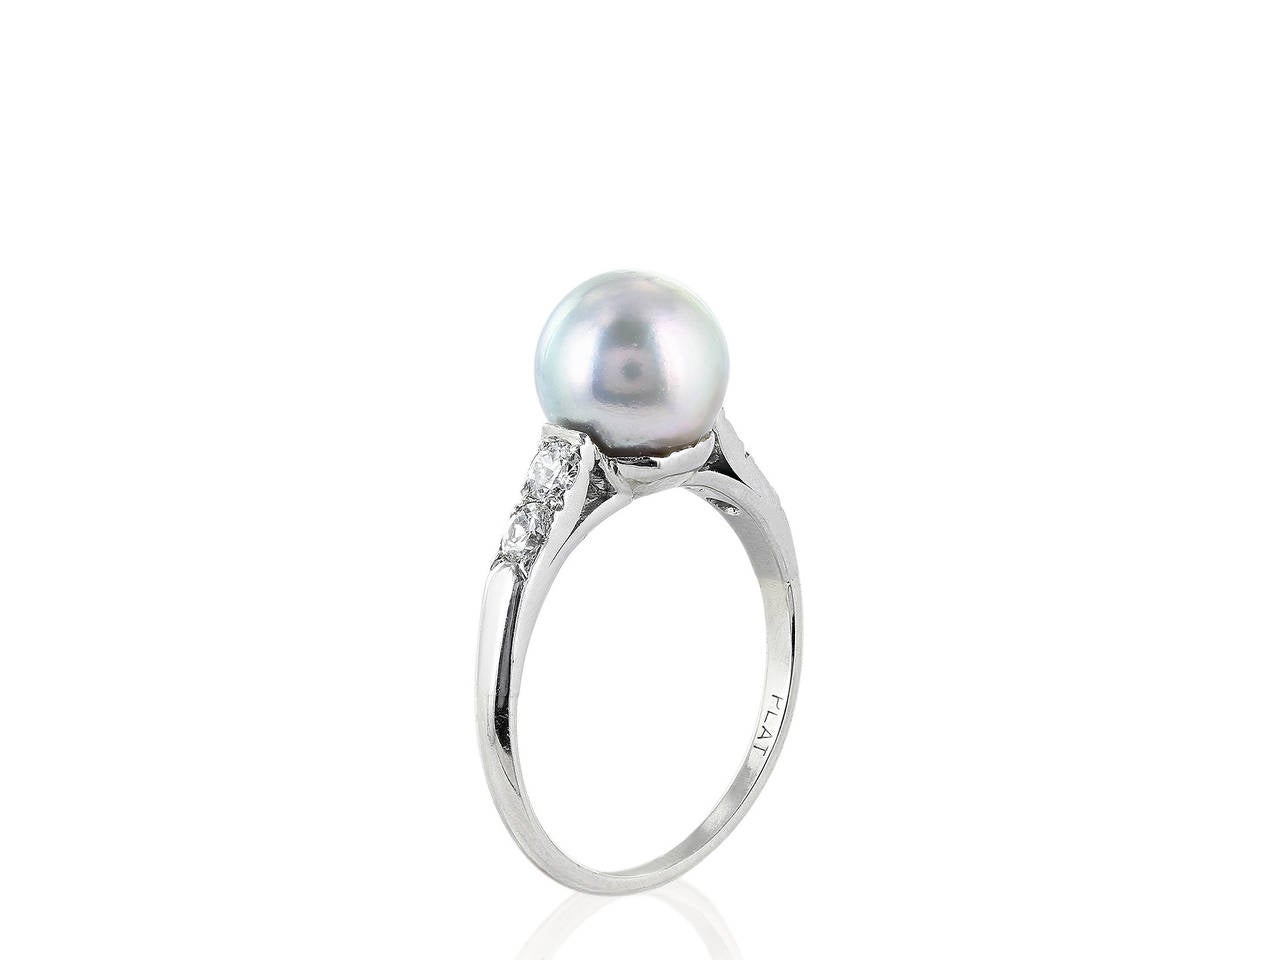 Platinum vintage ring consisting of one 8.80 mm gray pearl the pearl is flanked by 2 Old European cut diamond accents on each side.